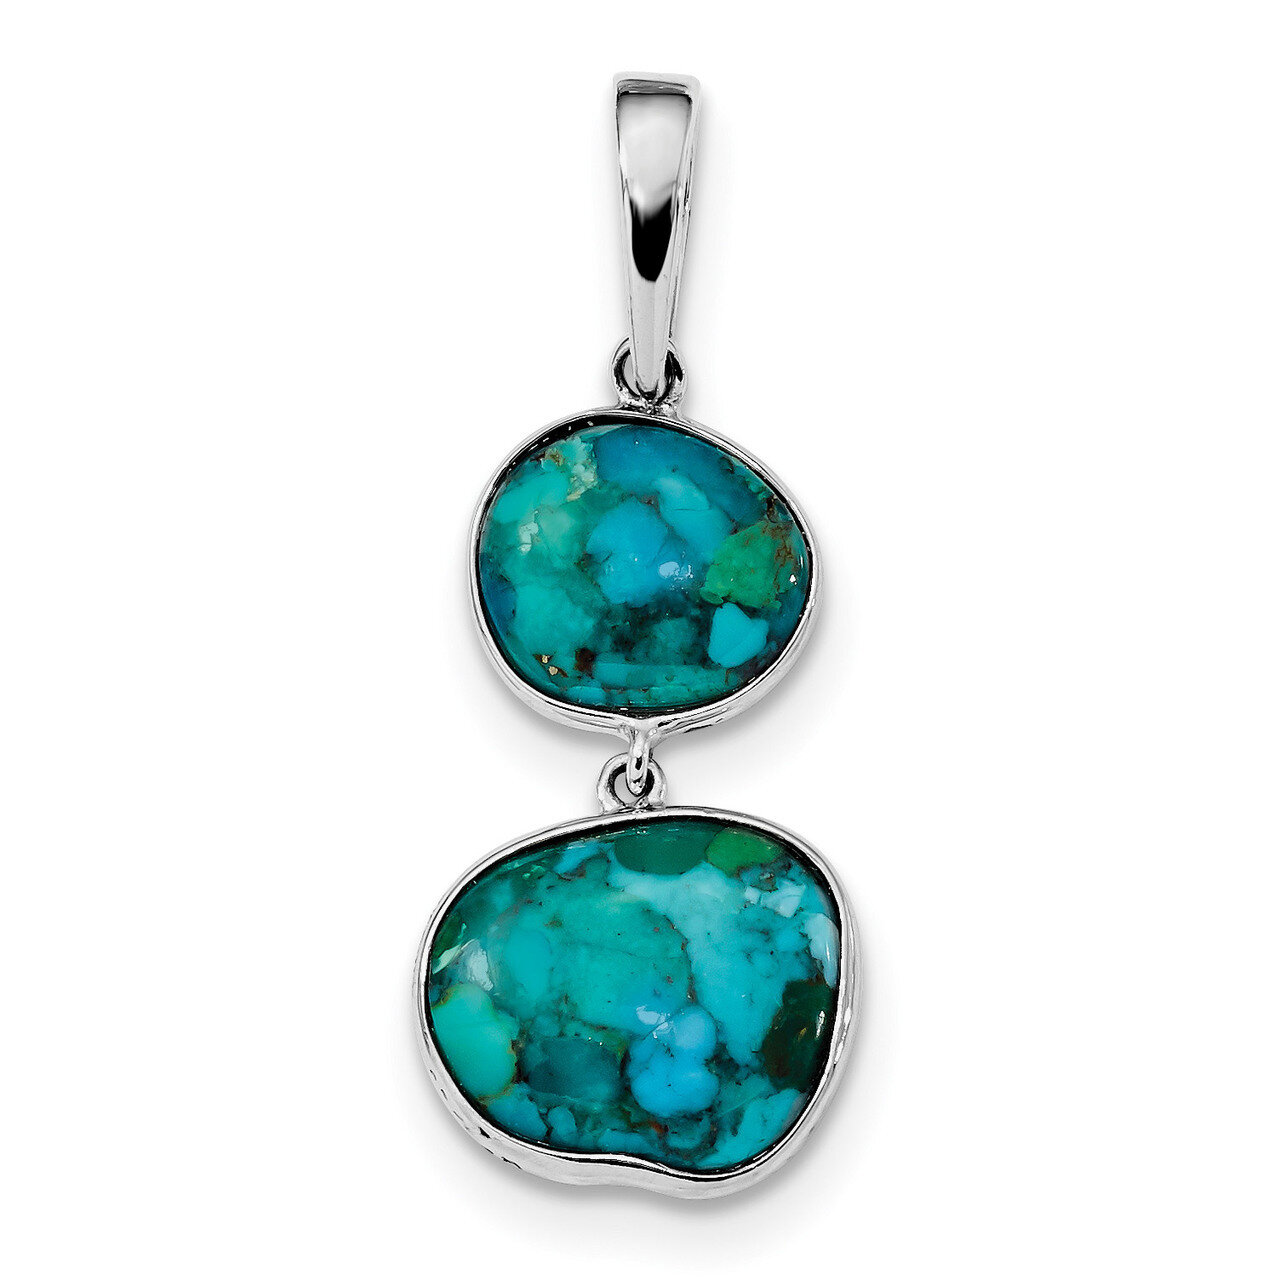 Reconstituted Turquoise Pendant Sterling Silver Rhodium-plated QP4989